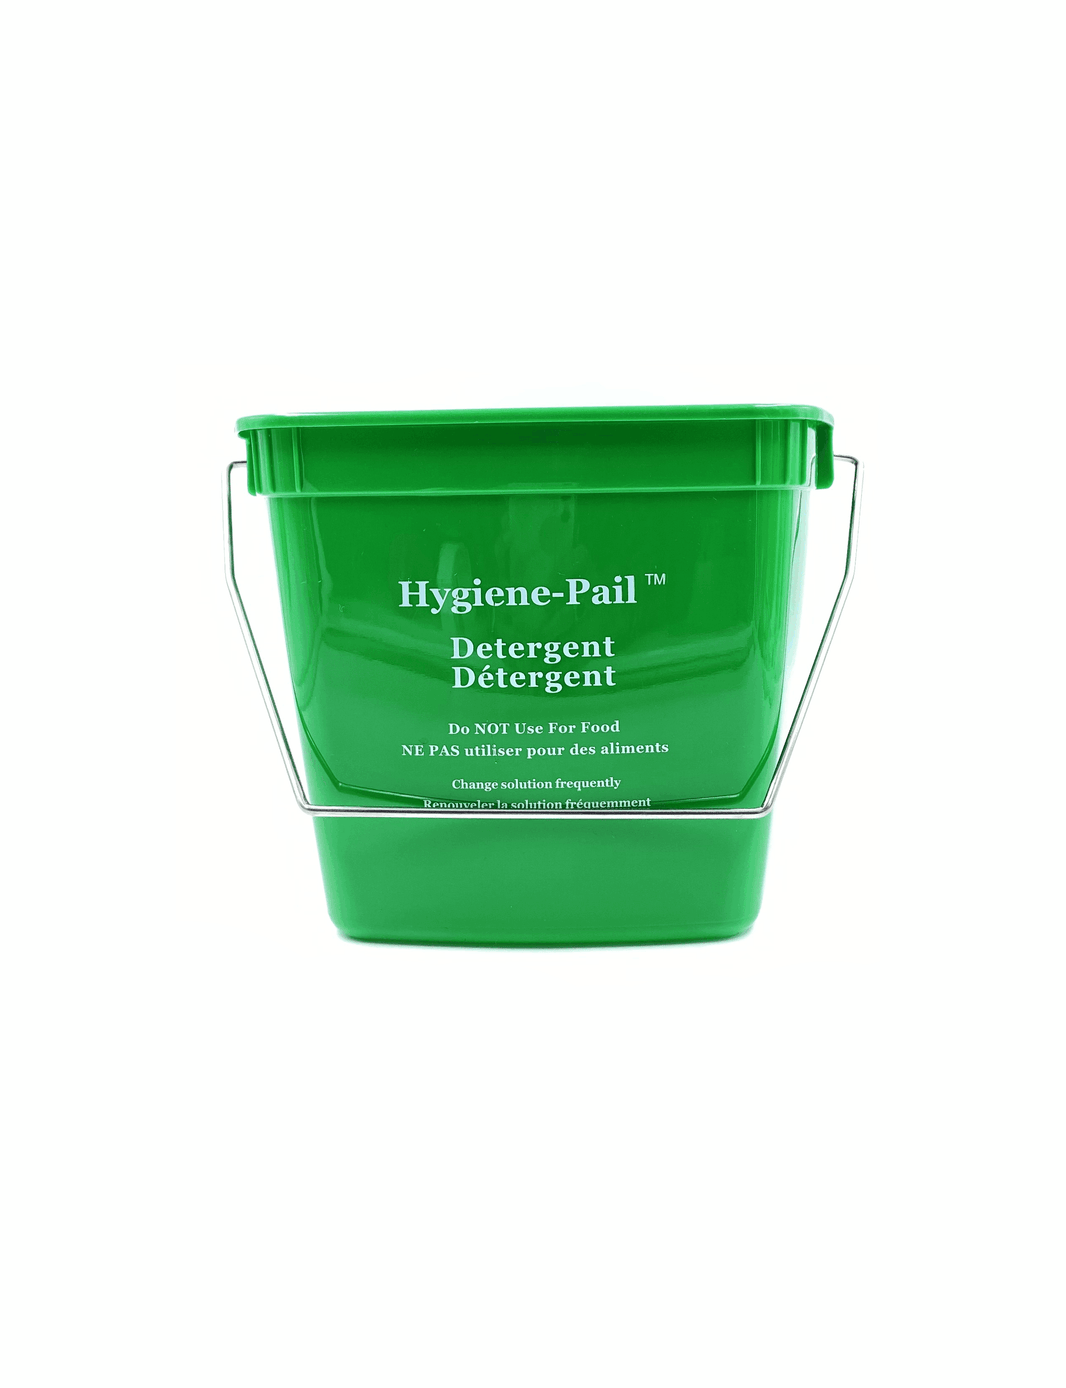 Green 3 Quart Cleaning Bucket For Home Or Commercial Use / KNICER